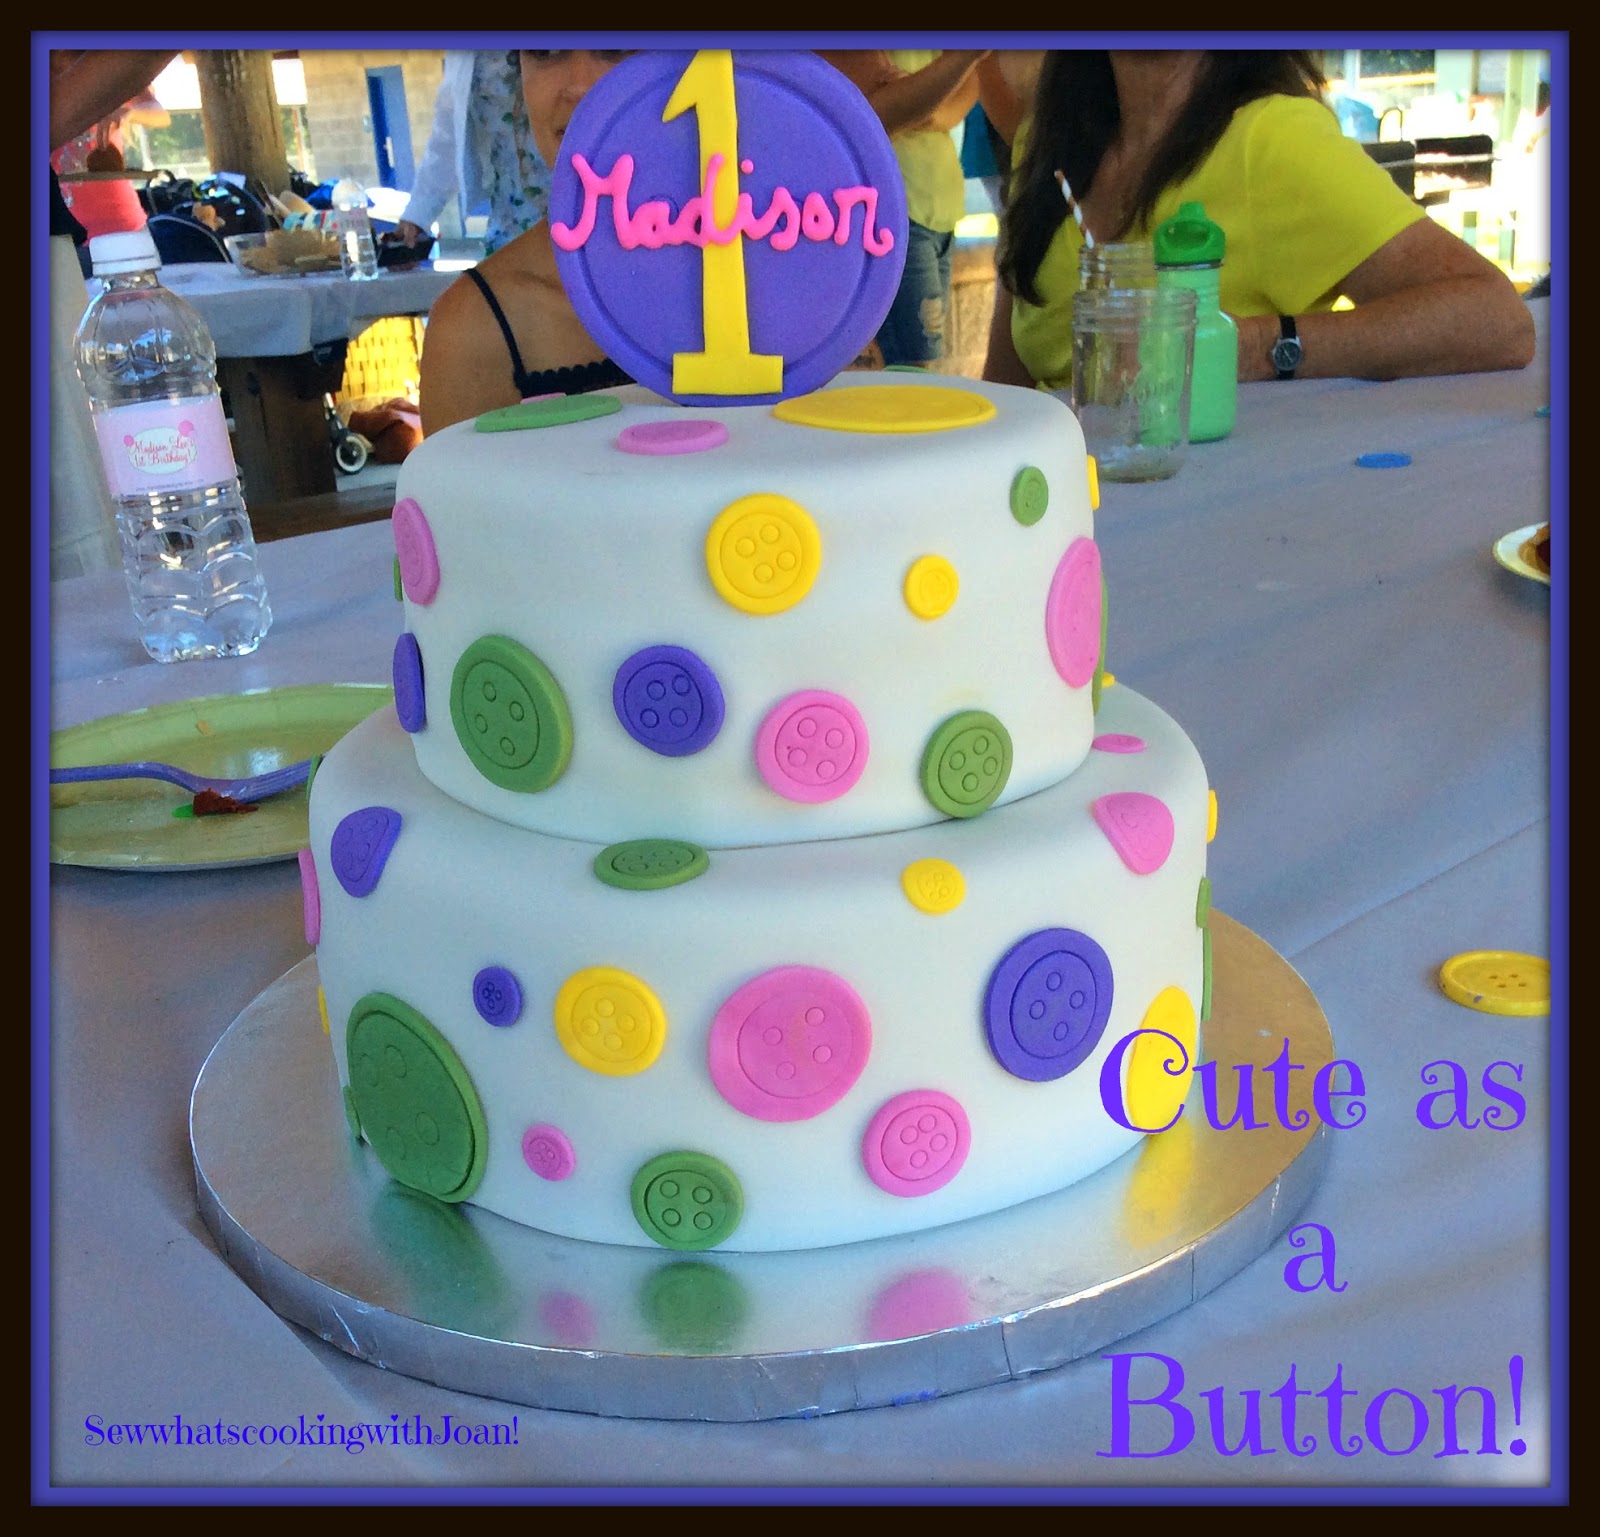 Details more than 160 button cake